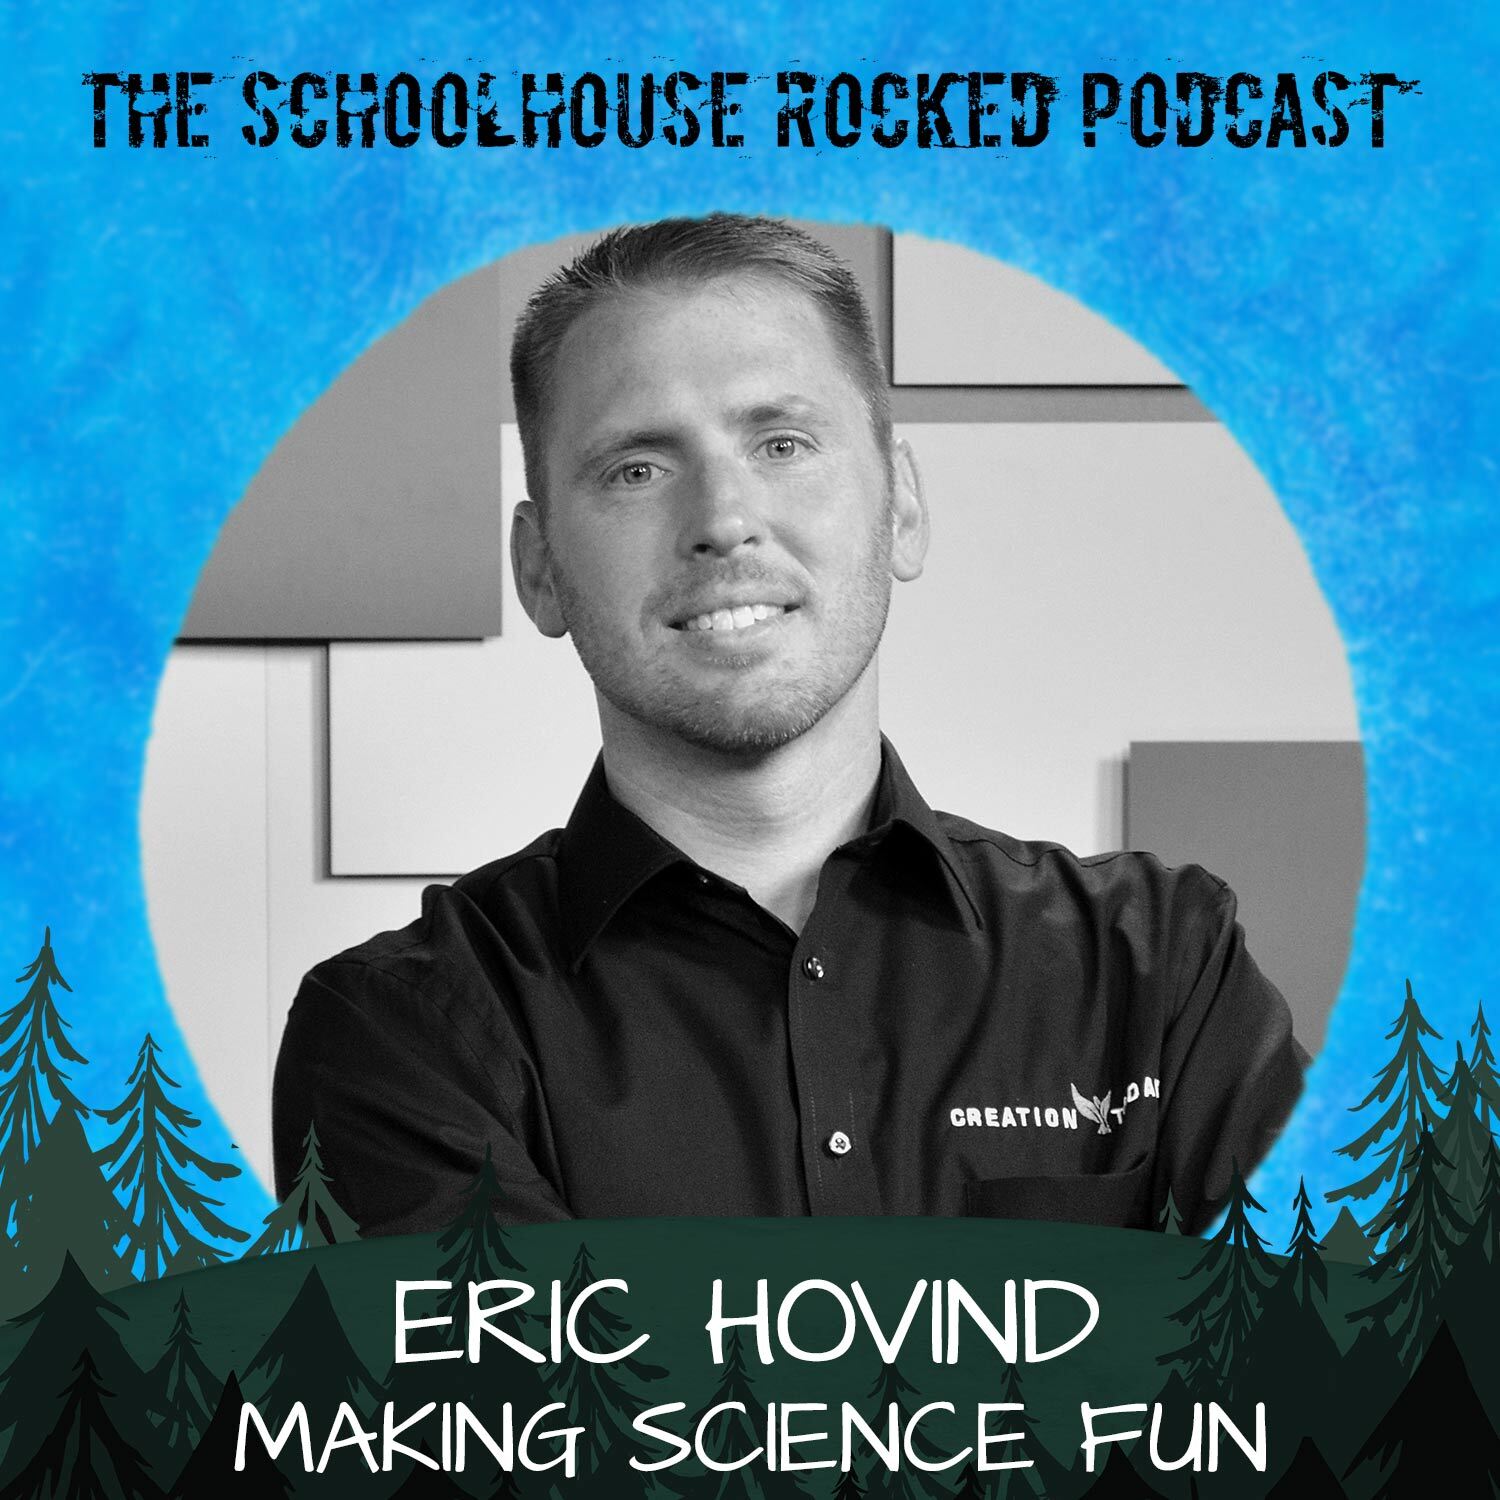 Making Science Fun - Interview with Eric Hovind of Creation Today